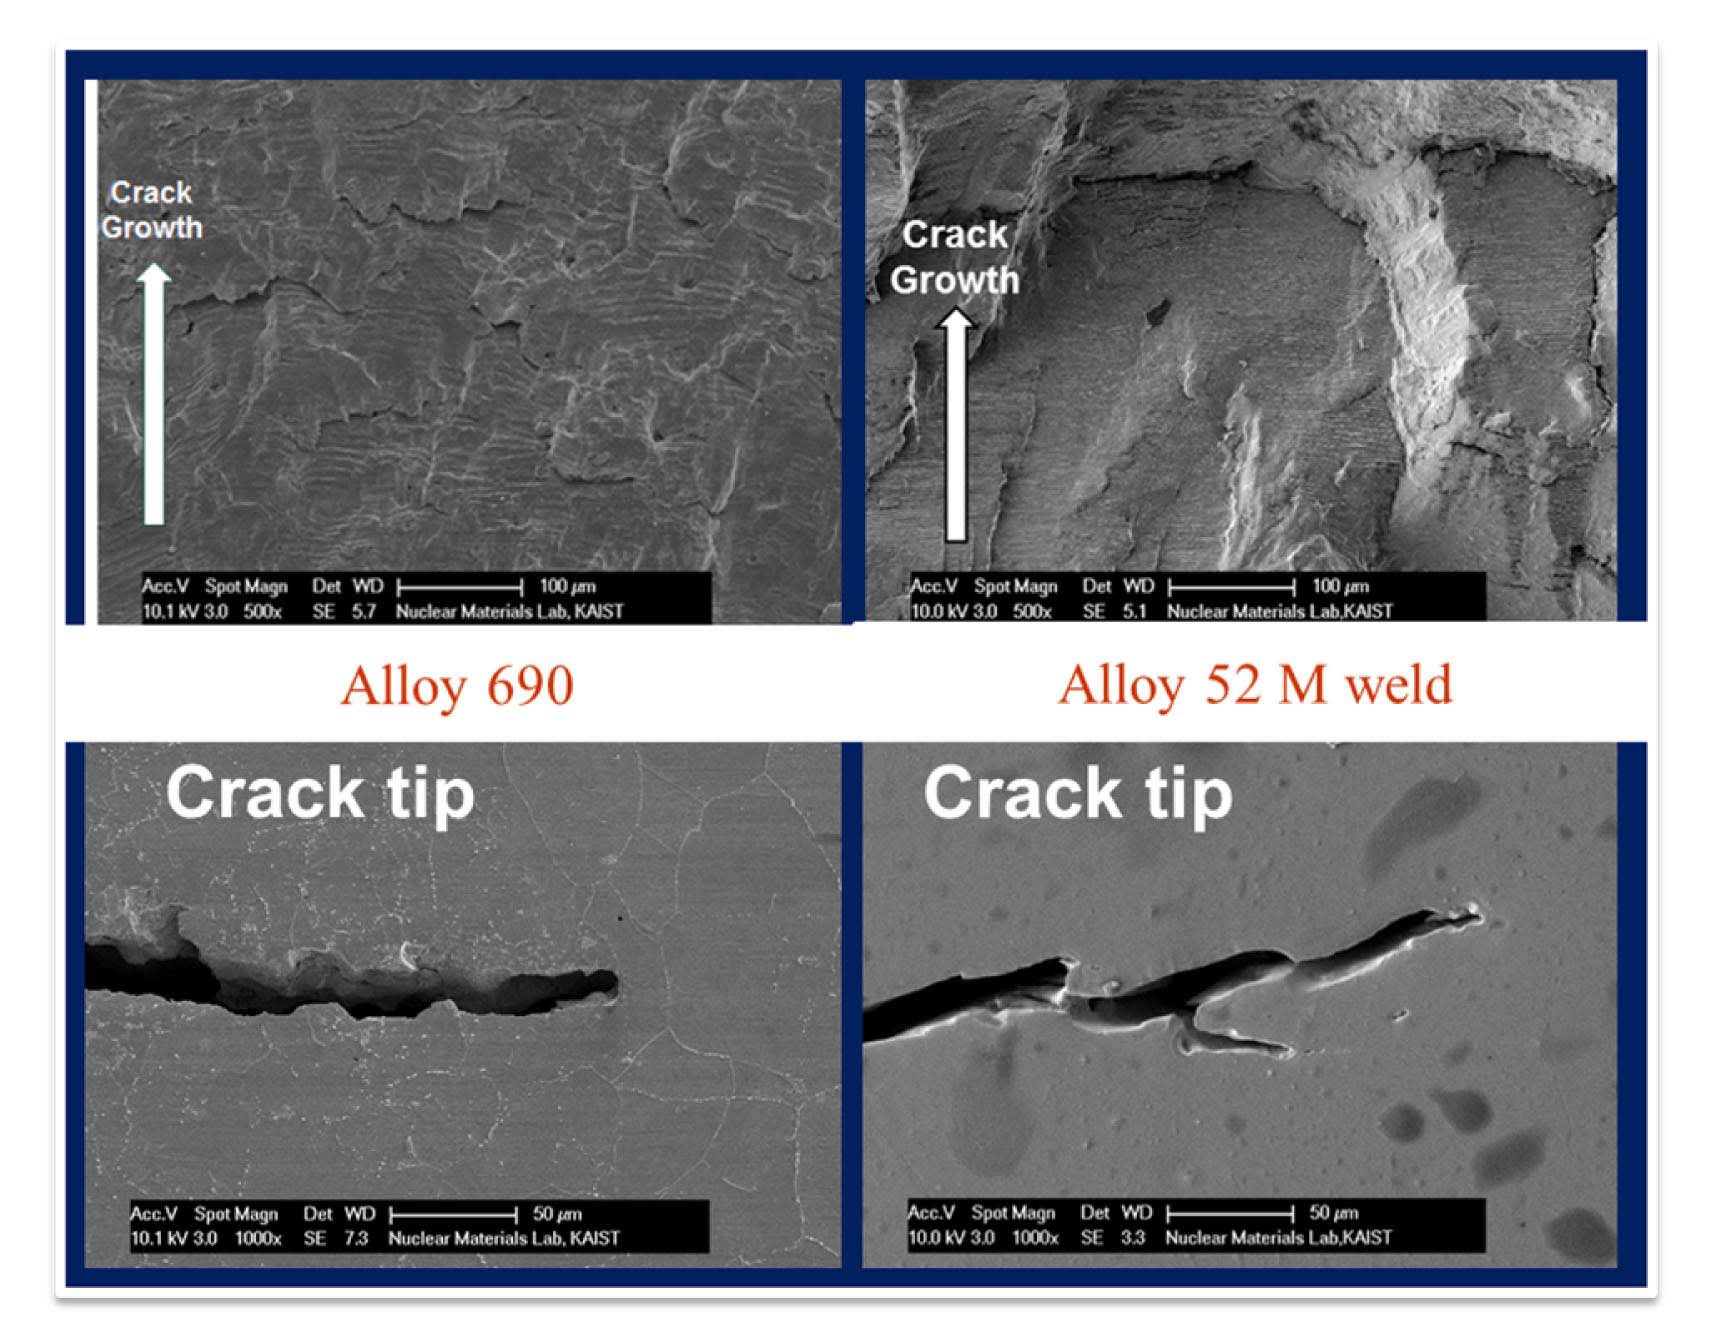 Fatigue Fractured Surface and Crack tips of Alloy 690 and 52M in a Simulated PWR Environment